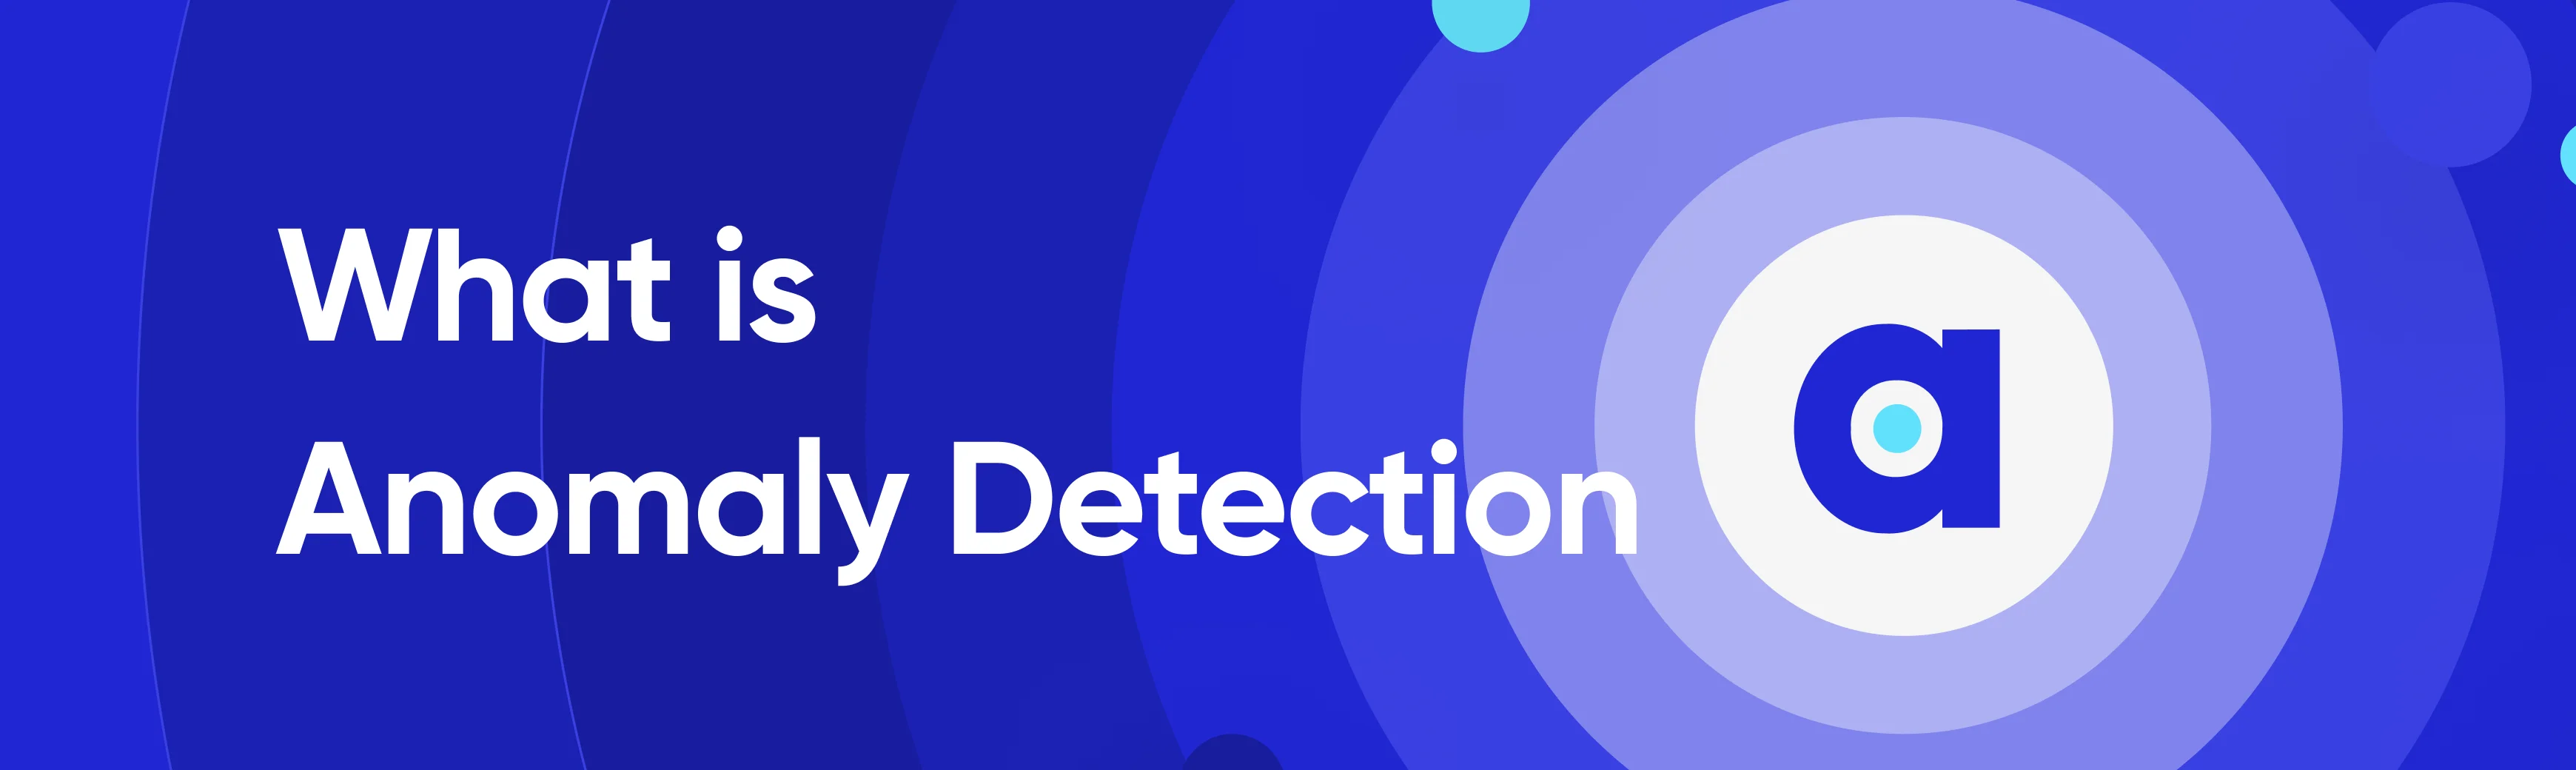 What is anomaly detection